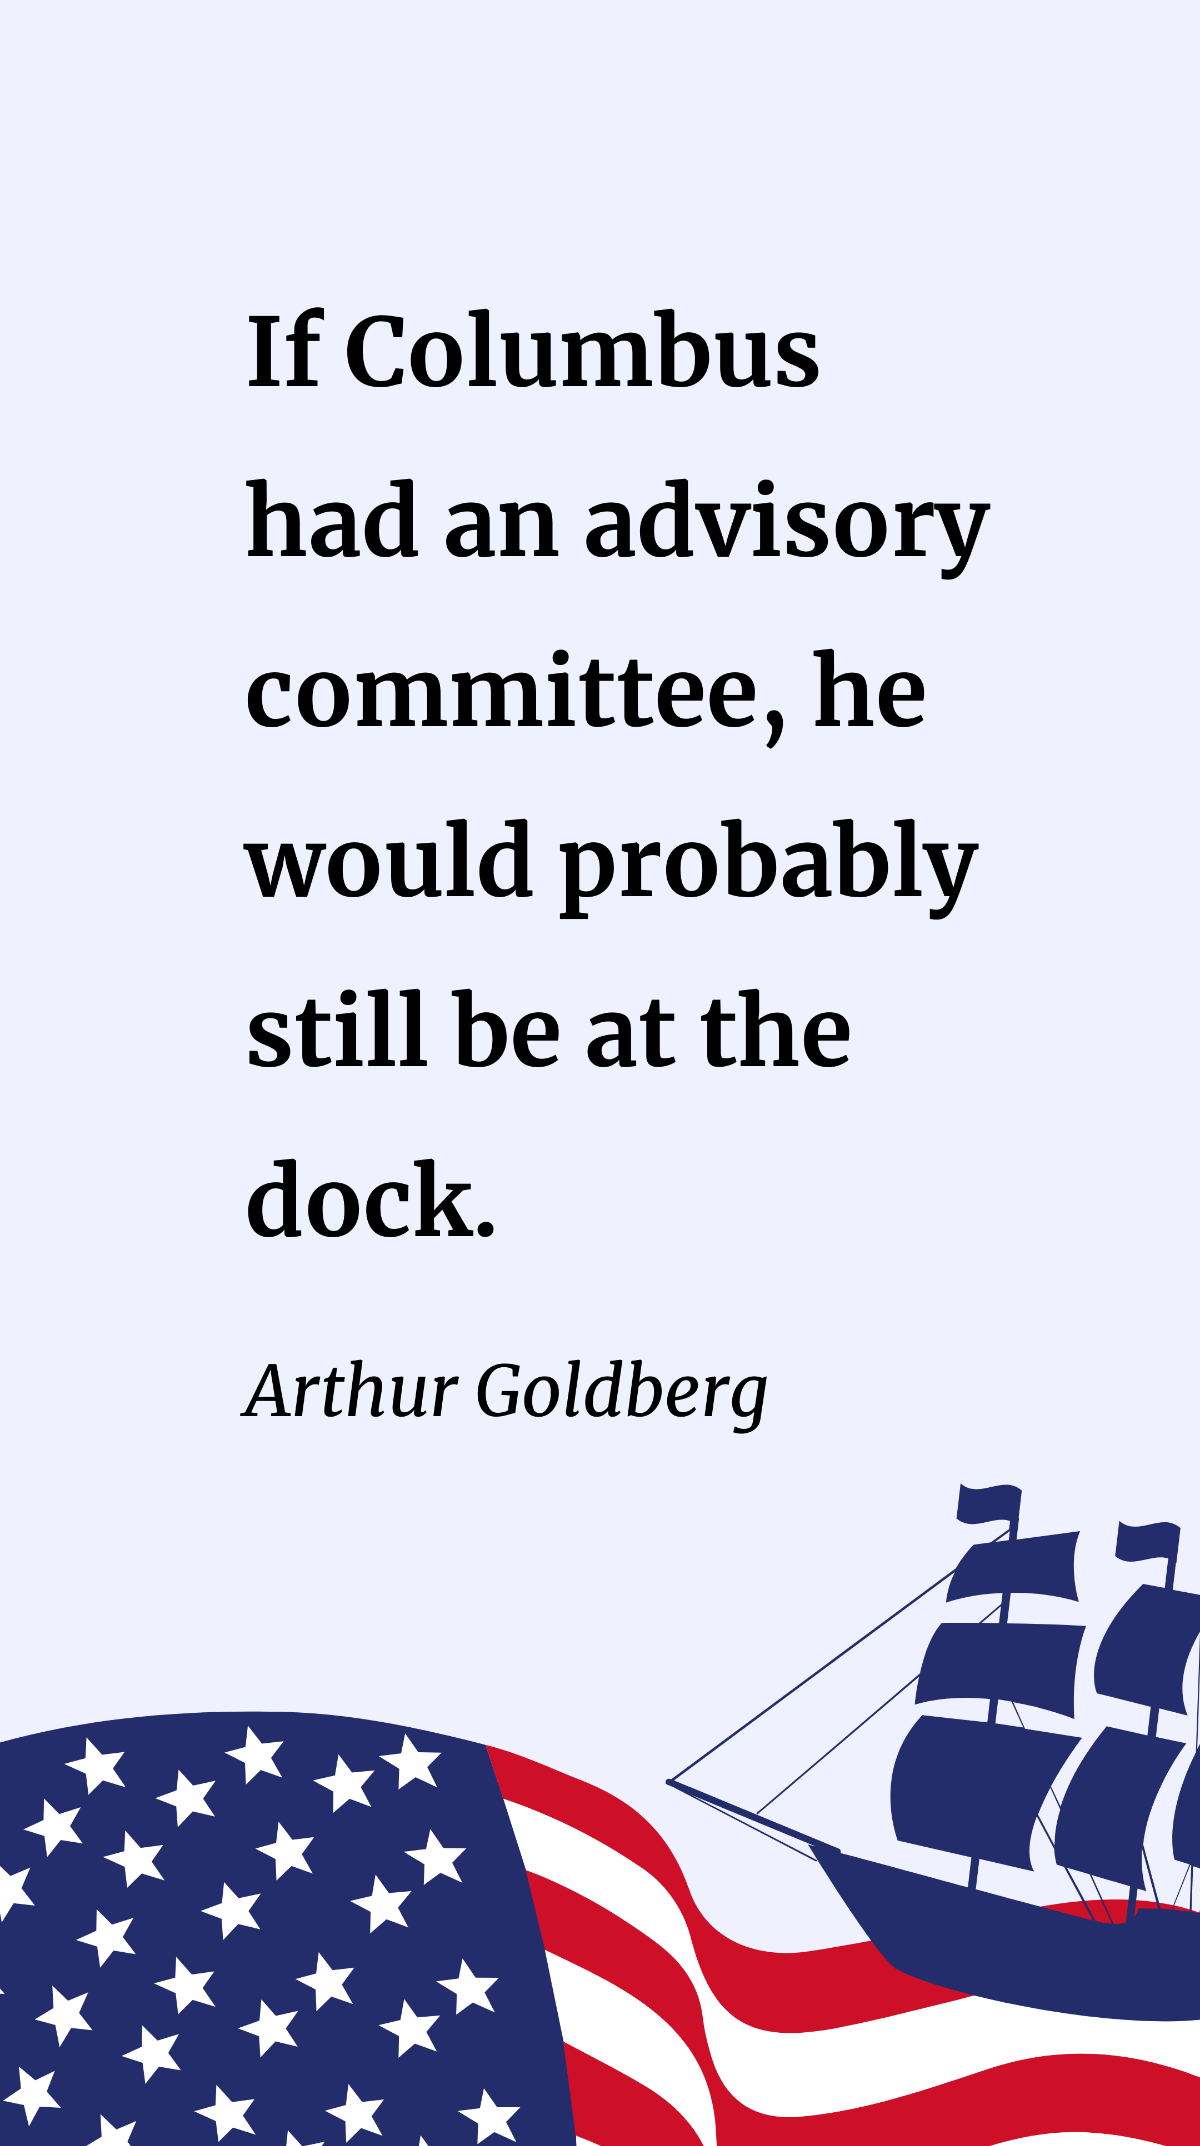 Arthur Goldberg- If Columbus had an advisory committee he would probably still be at the dock. Template